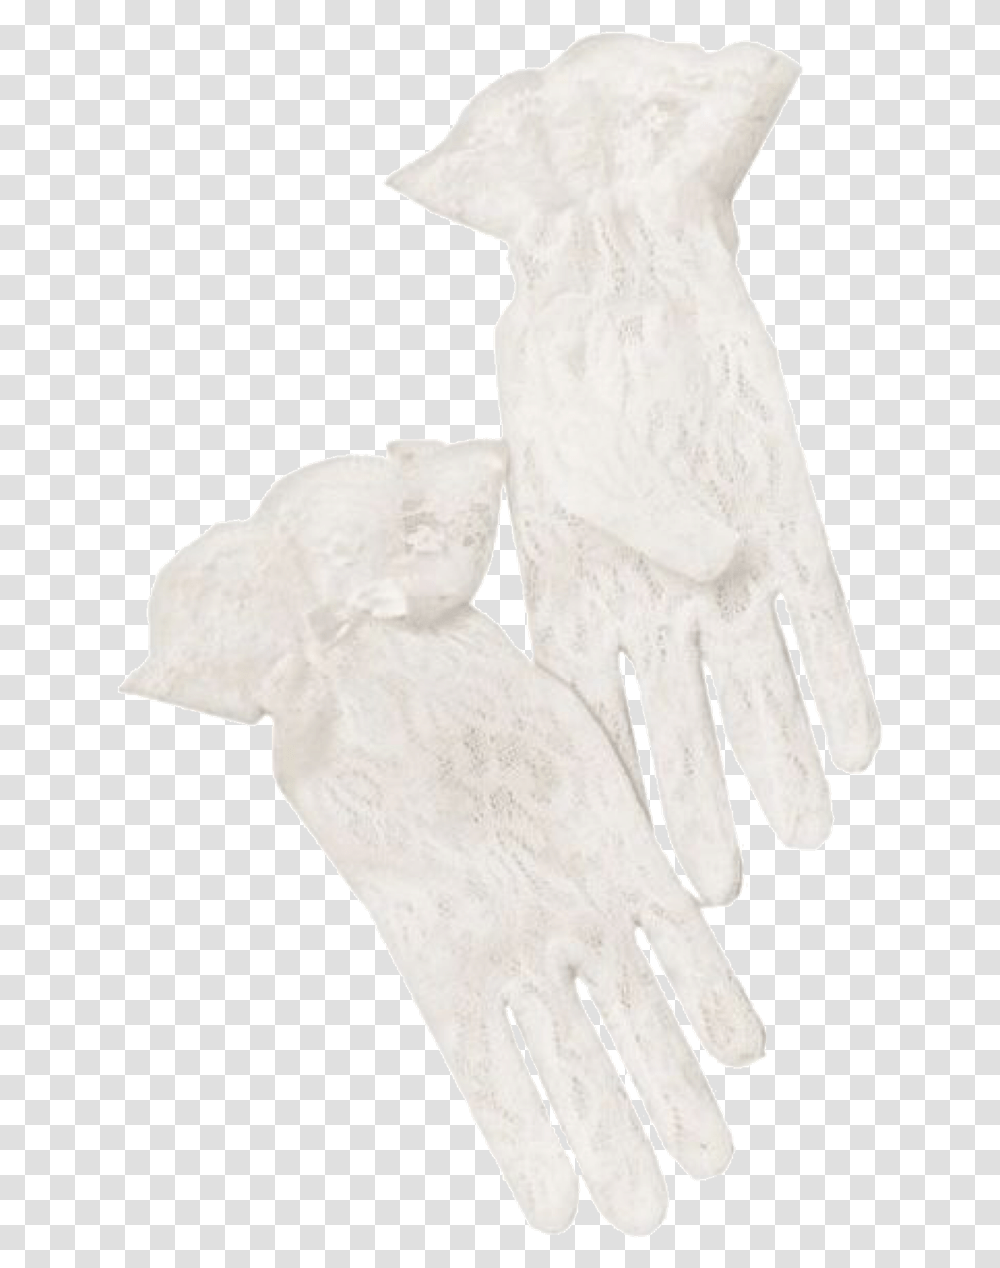 Pngs For Moodboards - Like Or Reblog If Used White Gloves Polyvore, Clothing, Apparel, Snowman, Winter Transparent Png